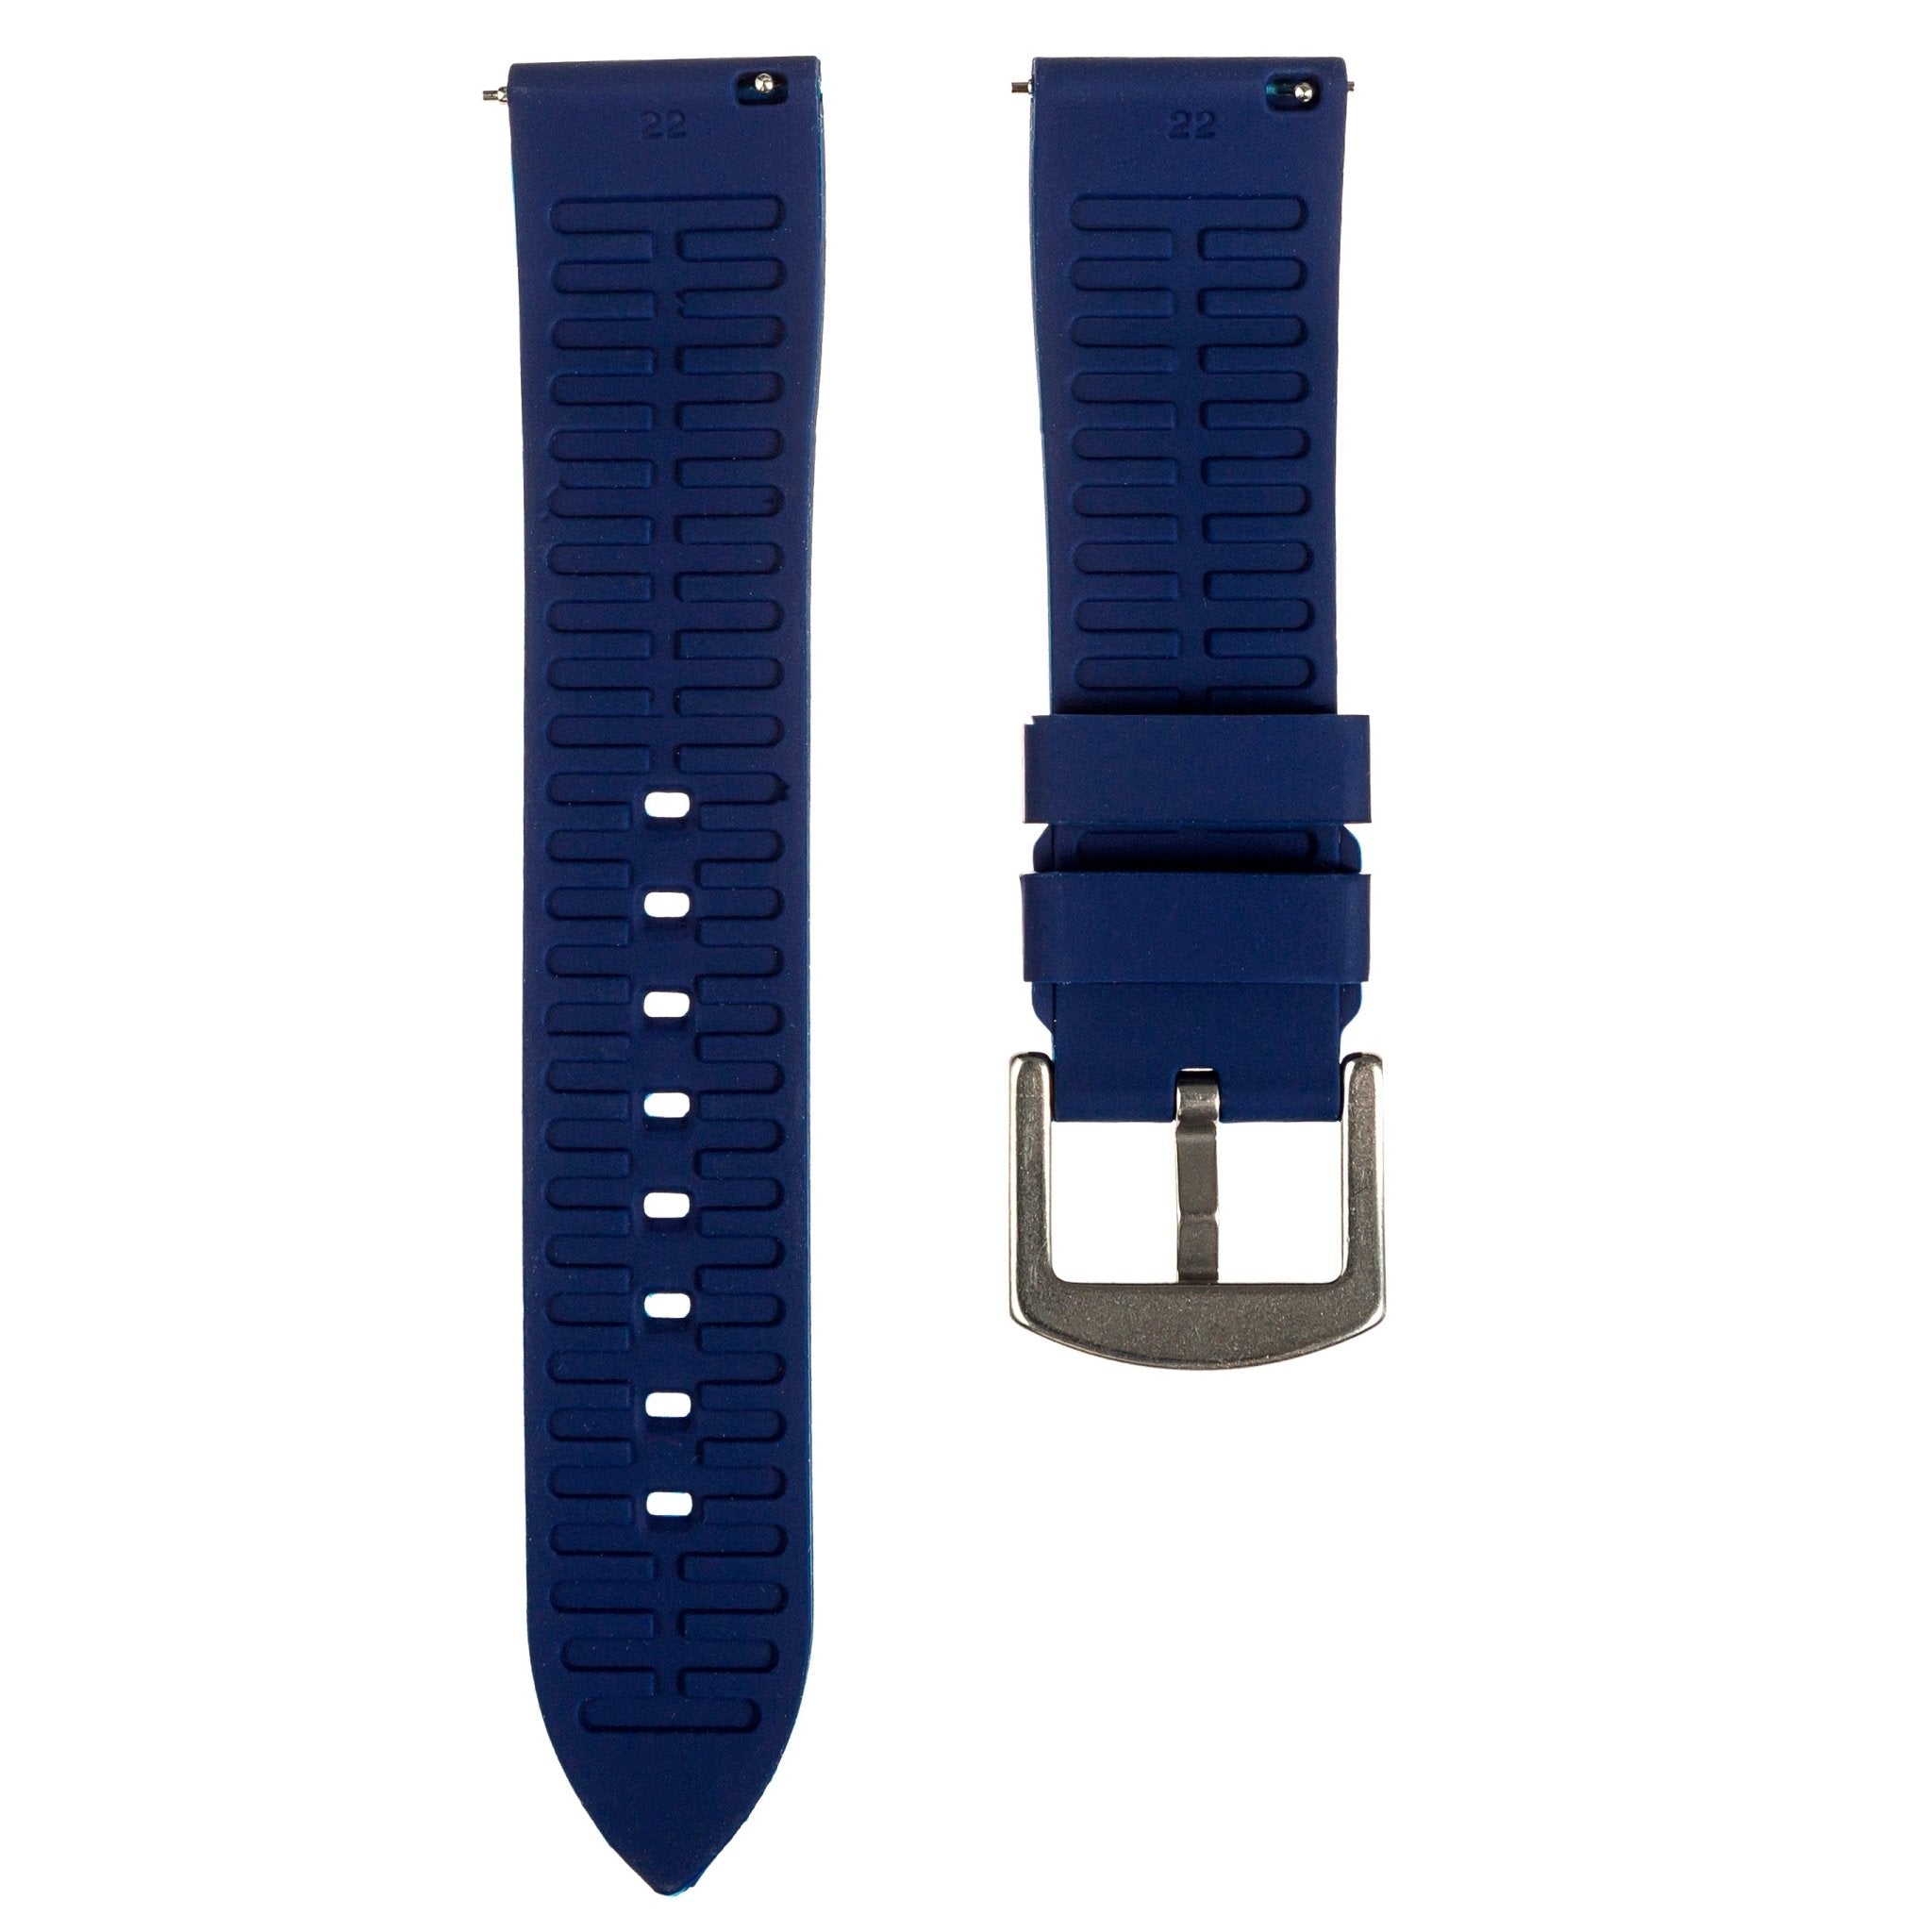 Textured Soft Silicone Strap - Quick-Release – Blue (2402) -StrapSeeker